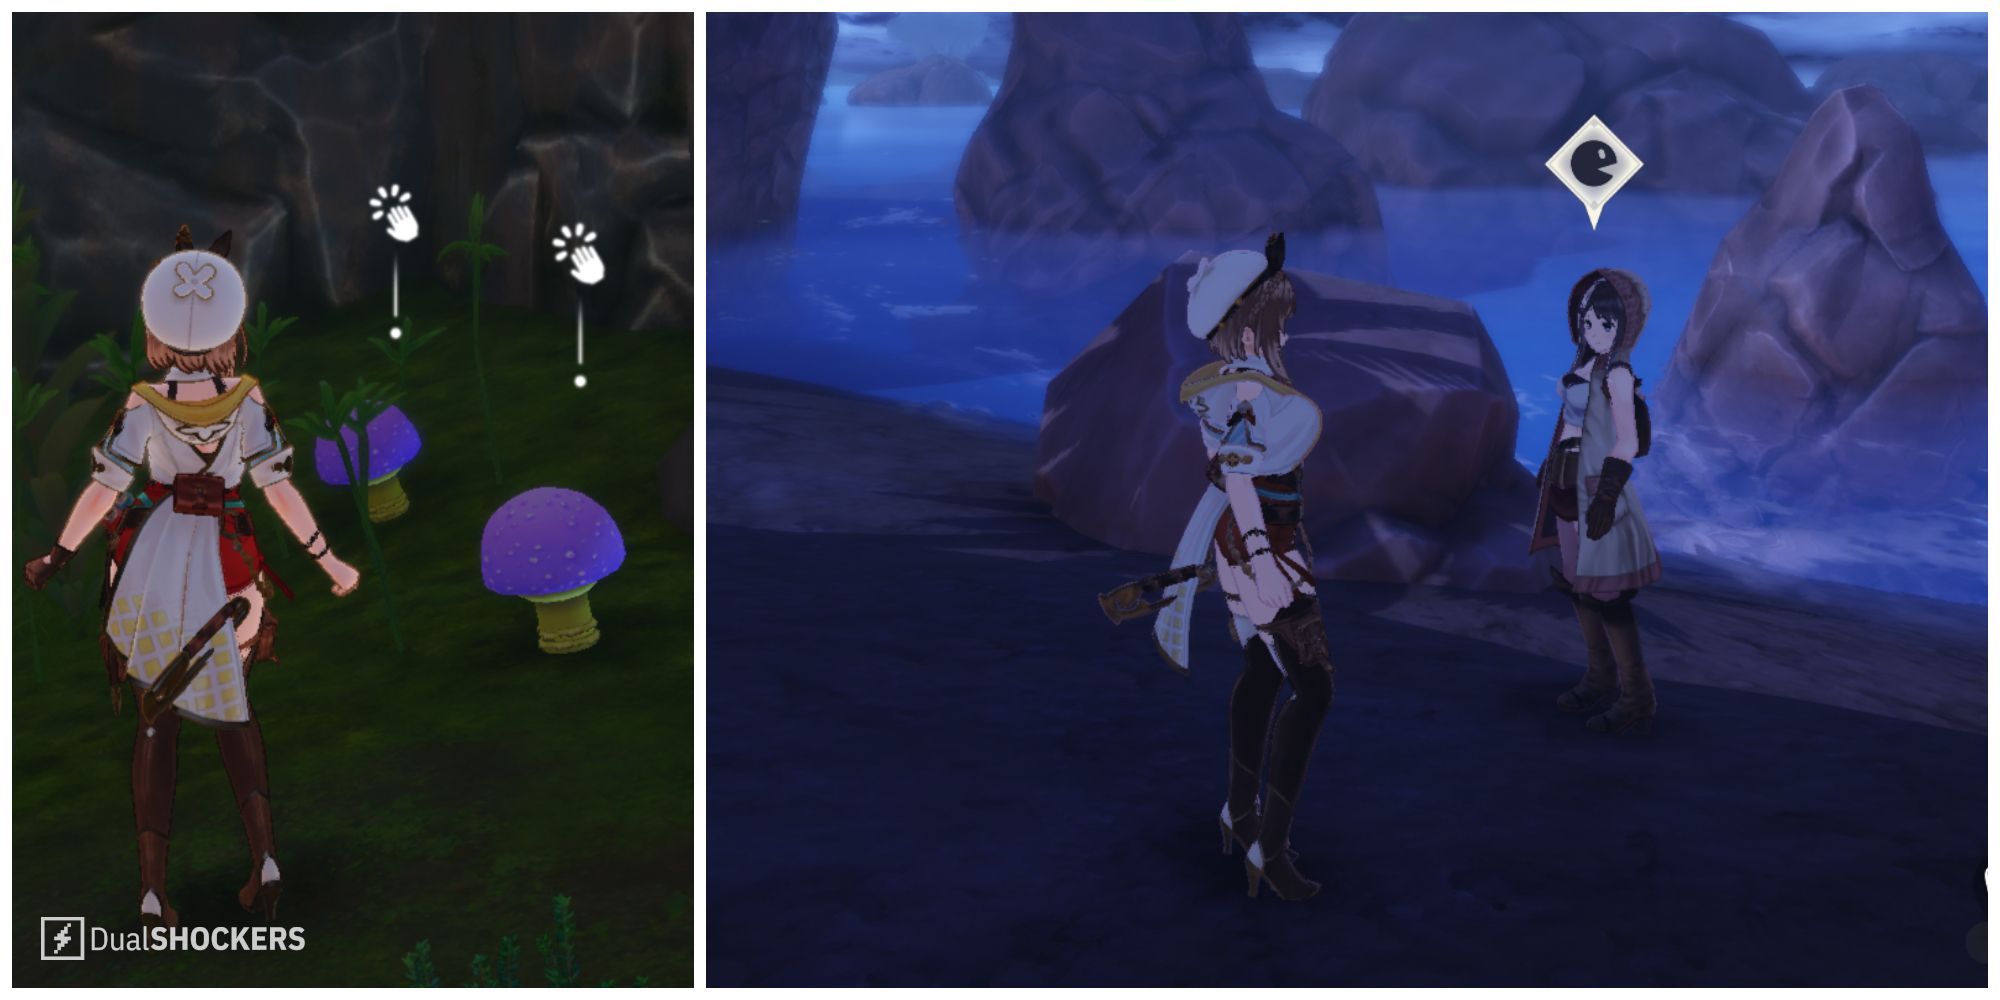 Split image of jellyfish mushrooms and the woman looking for the ultimate in Atelier Ryza 3.